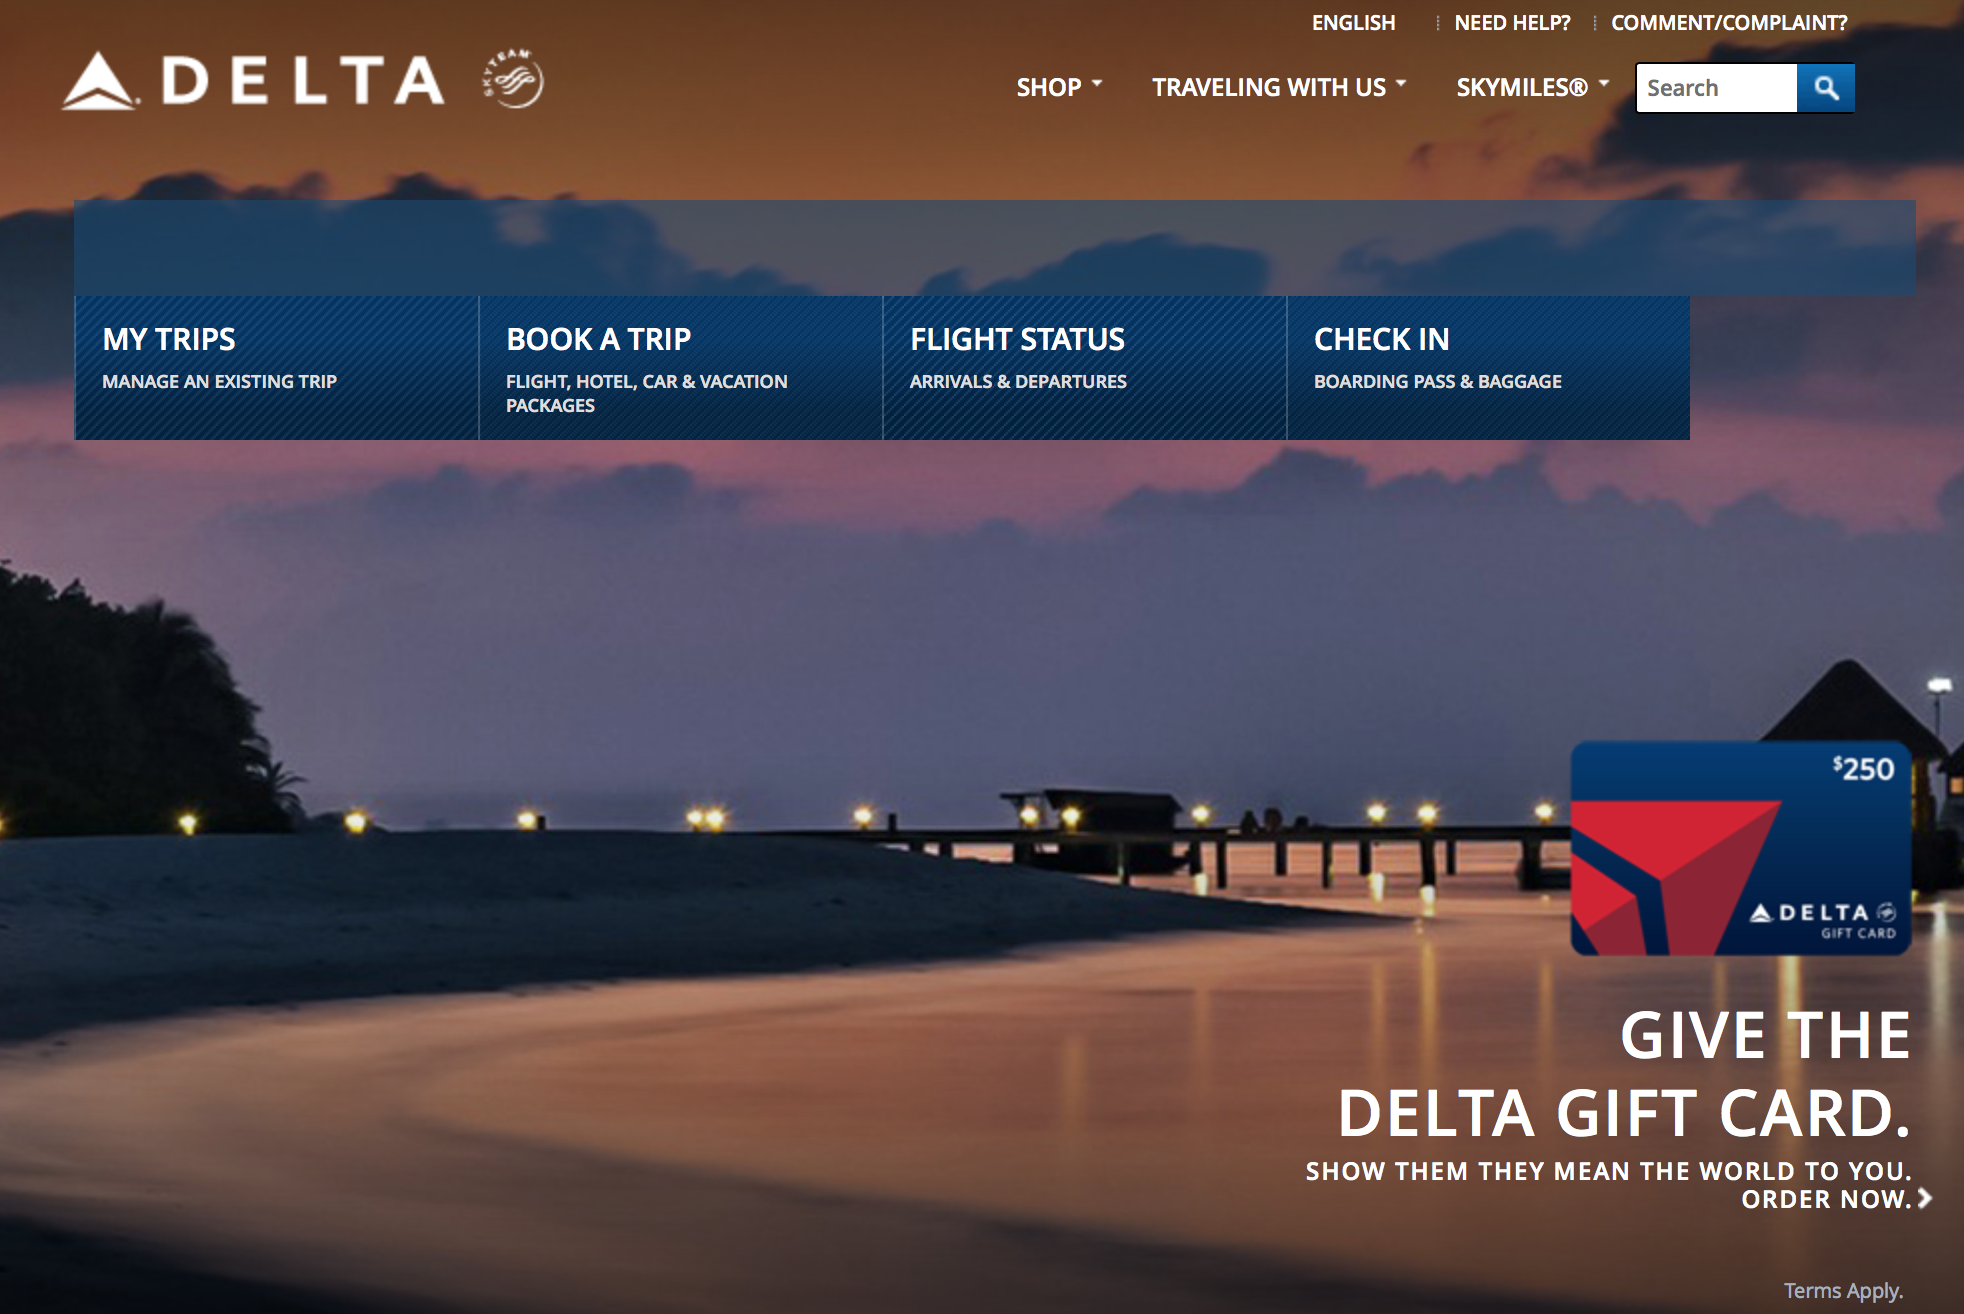 Delta Air Lines official Internet web site systemwide outage January 2017